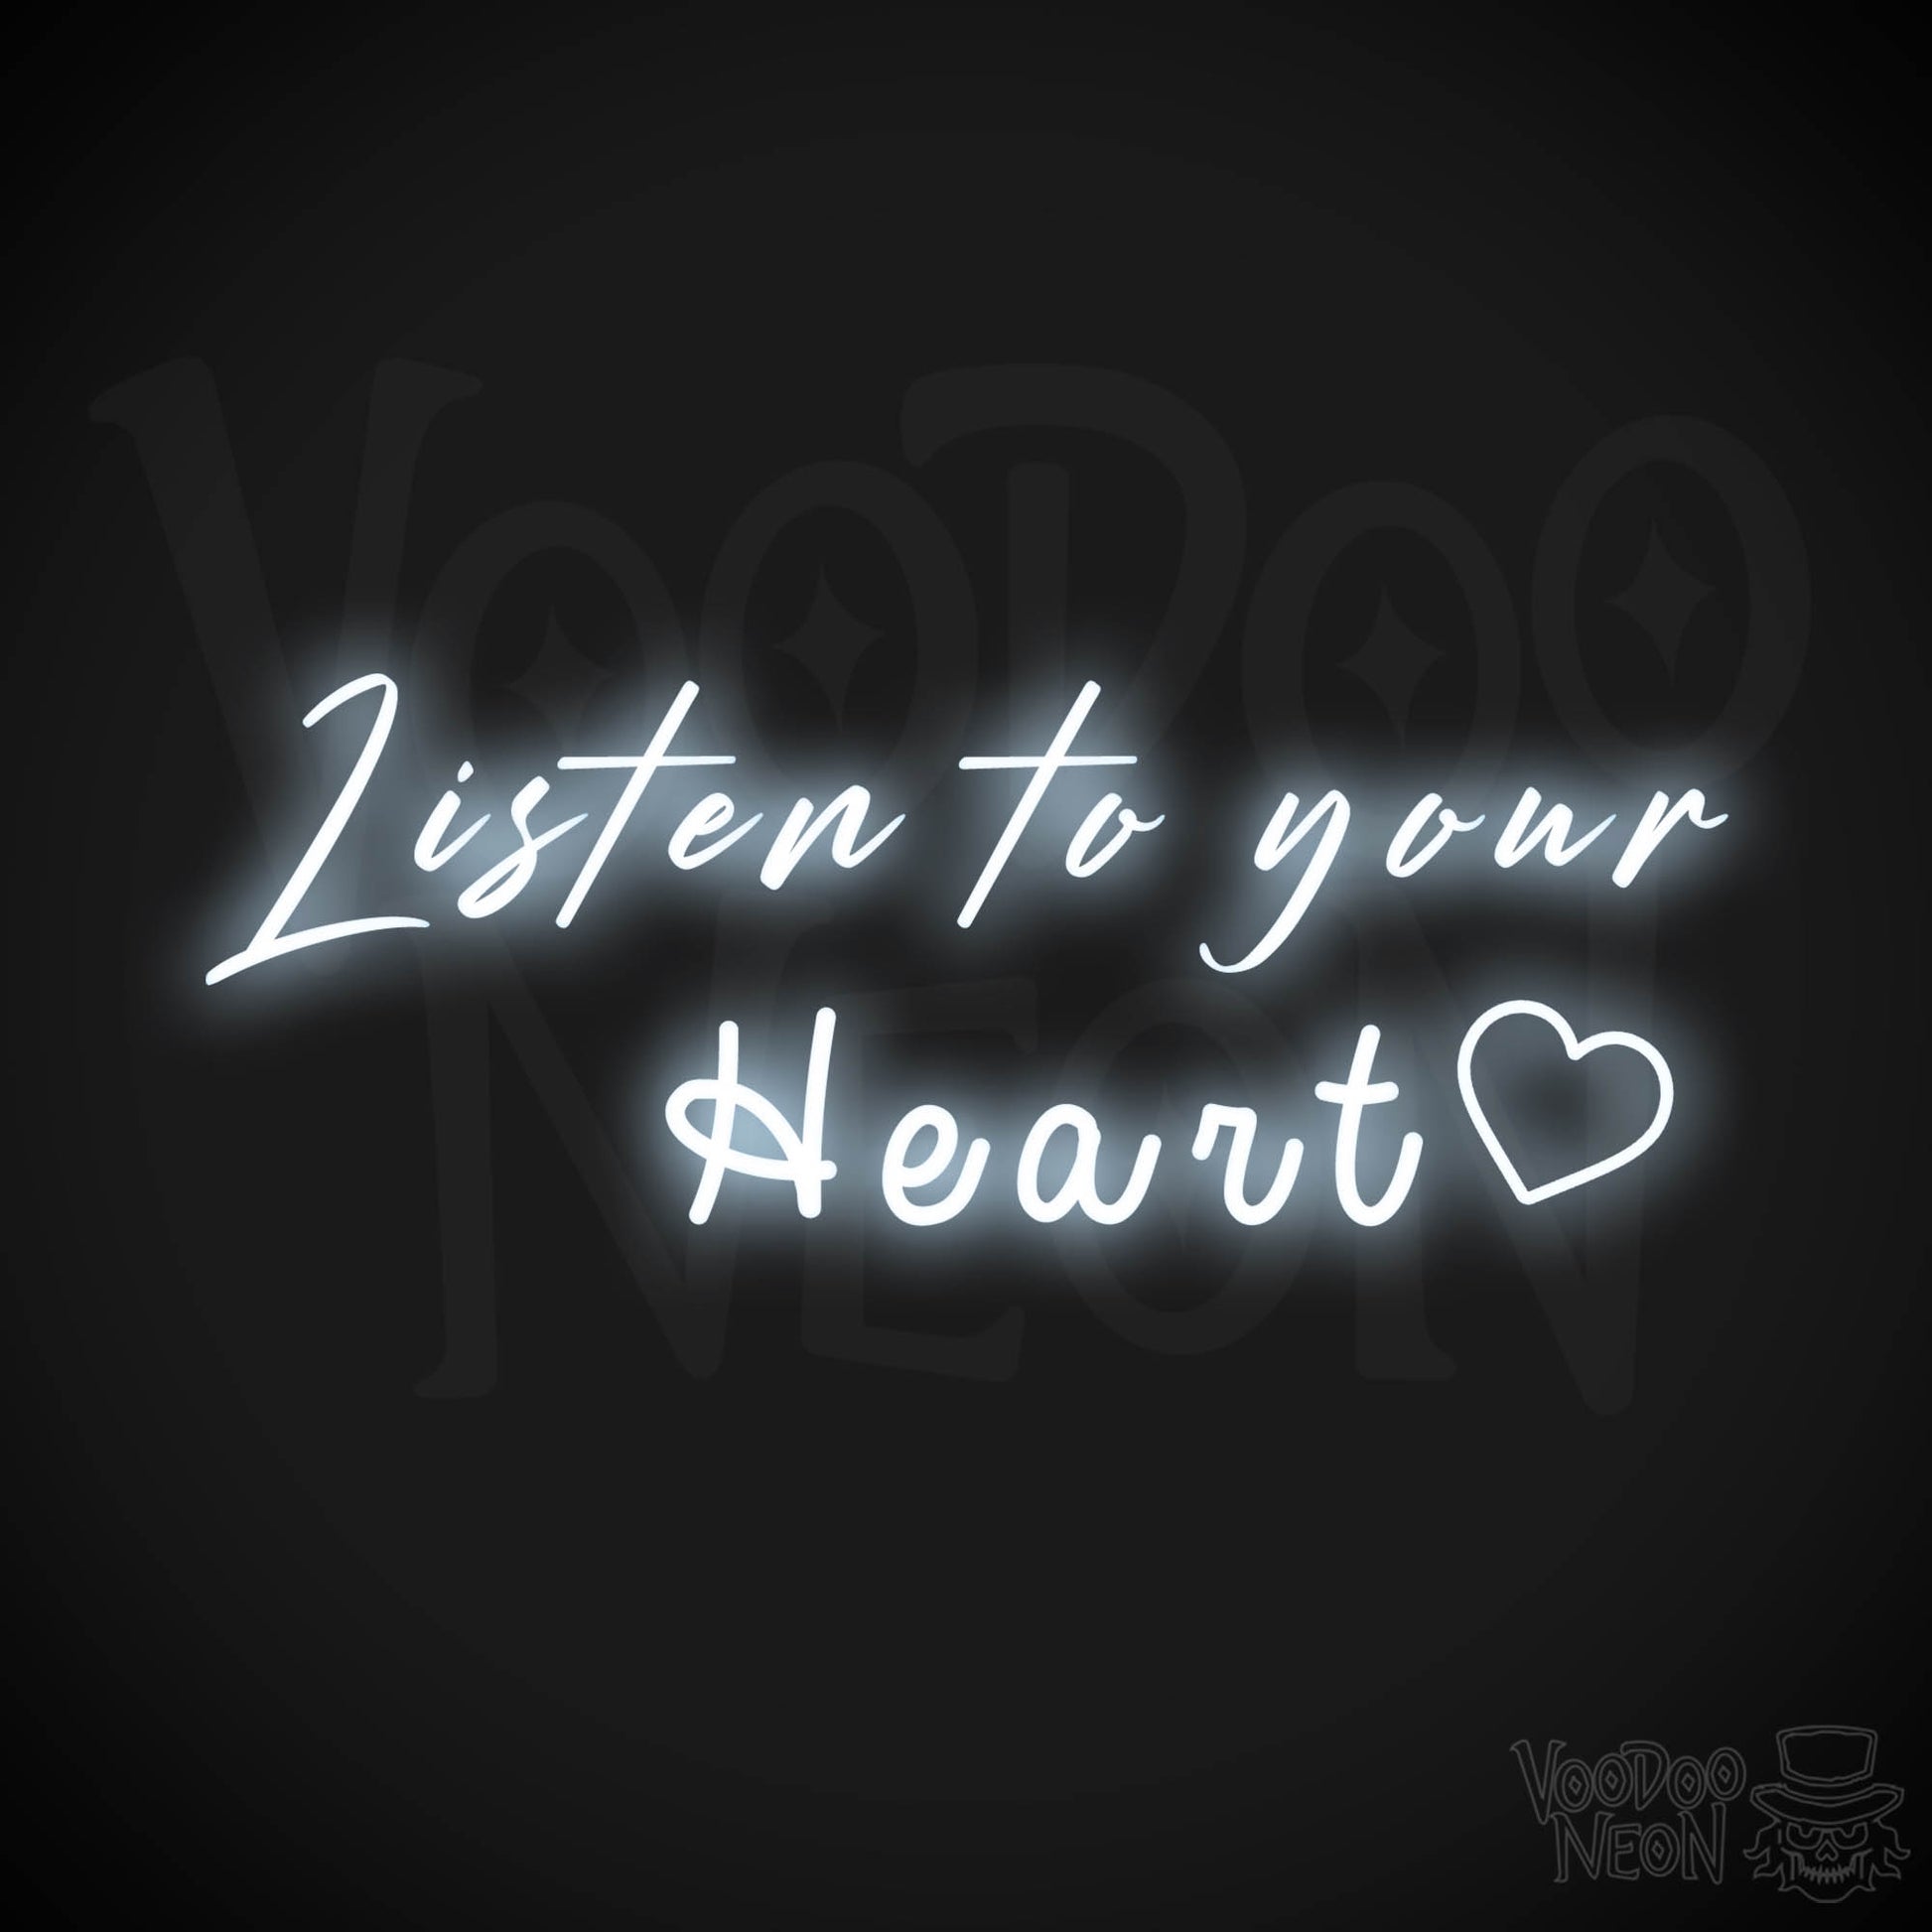 Listen To Your Heart Neon Sign - Neon Listen To Your Heart Sign - Wedding Sign - Color Cool White